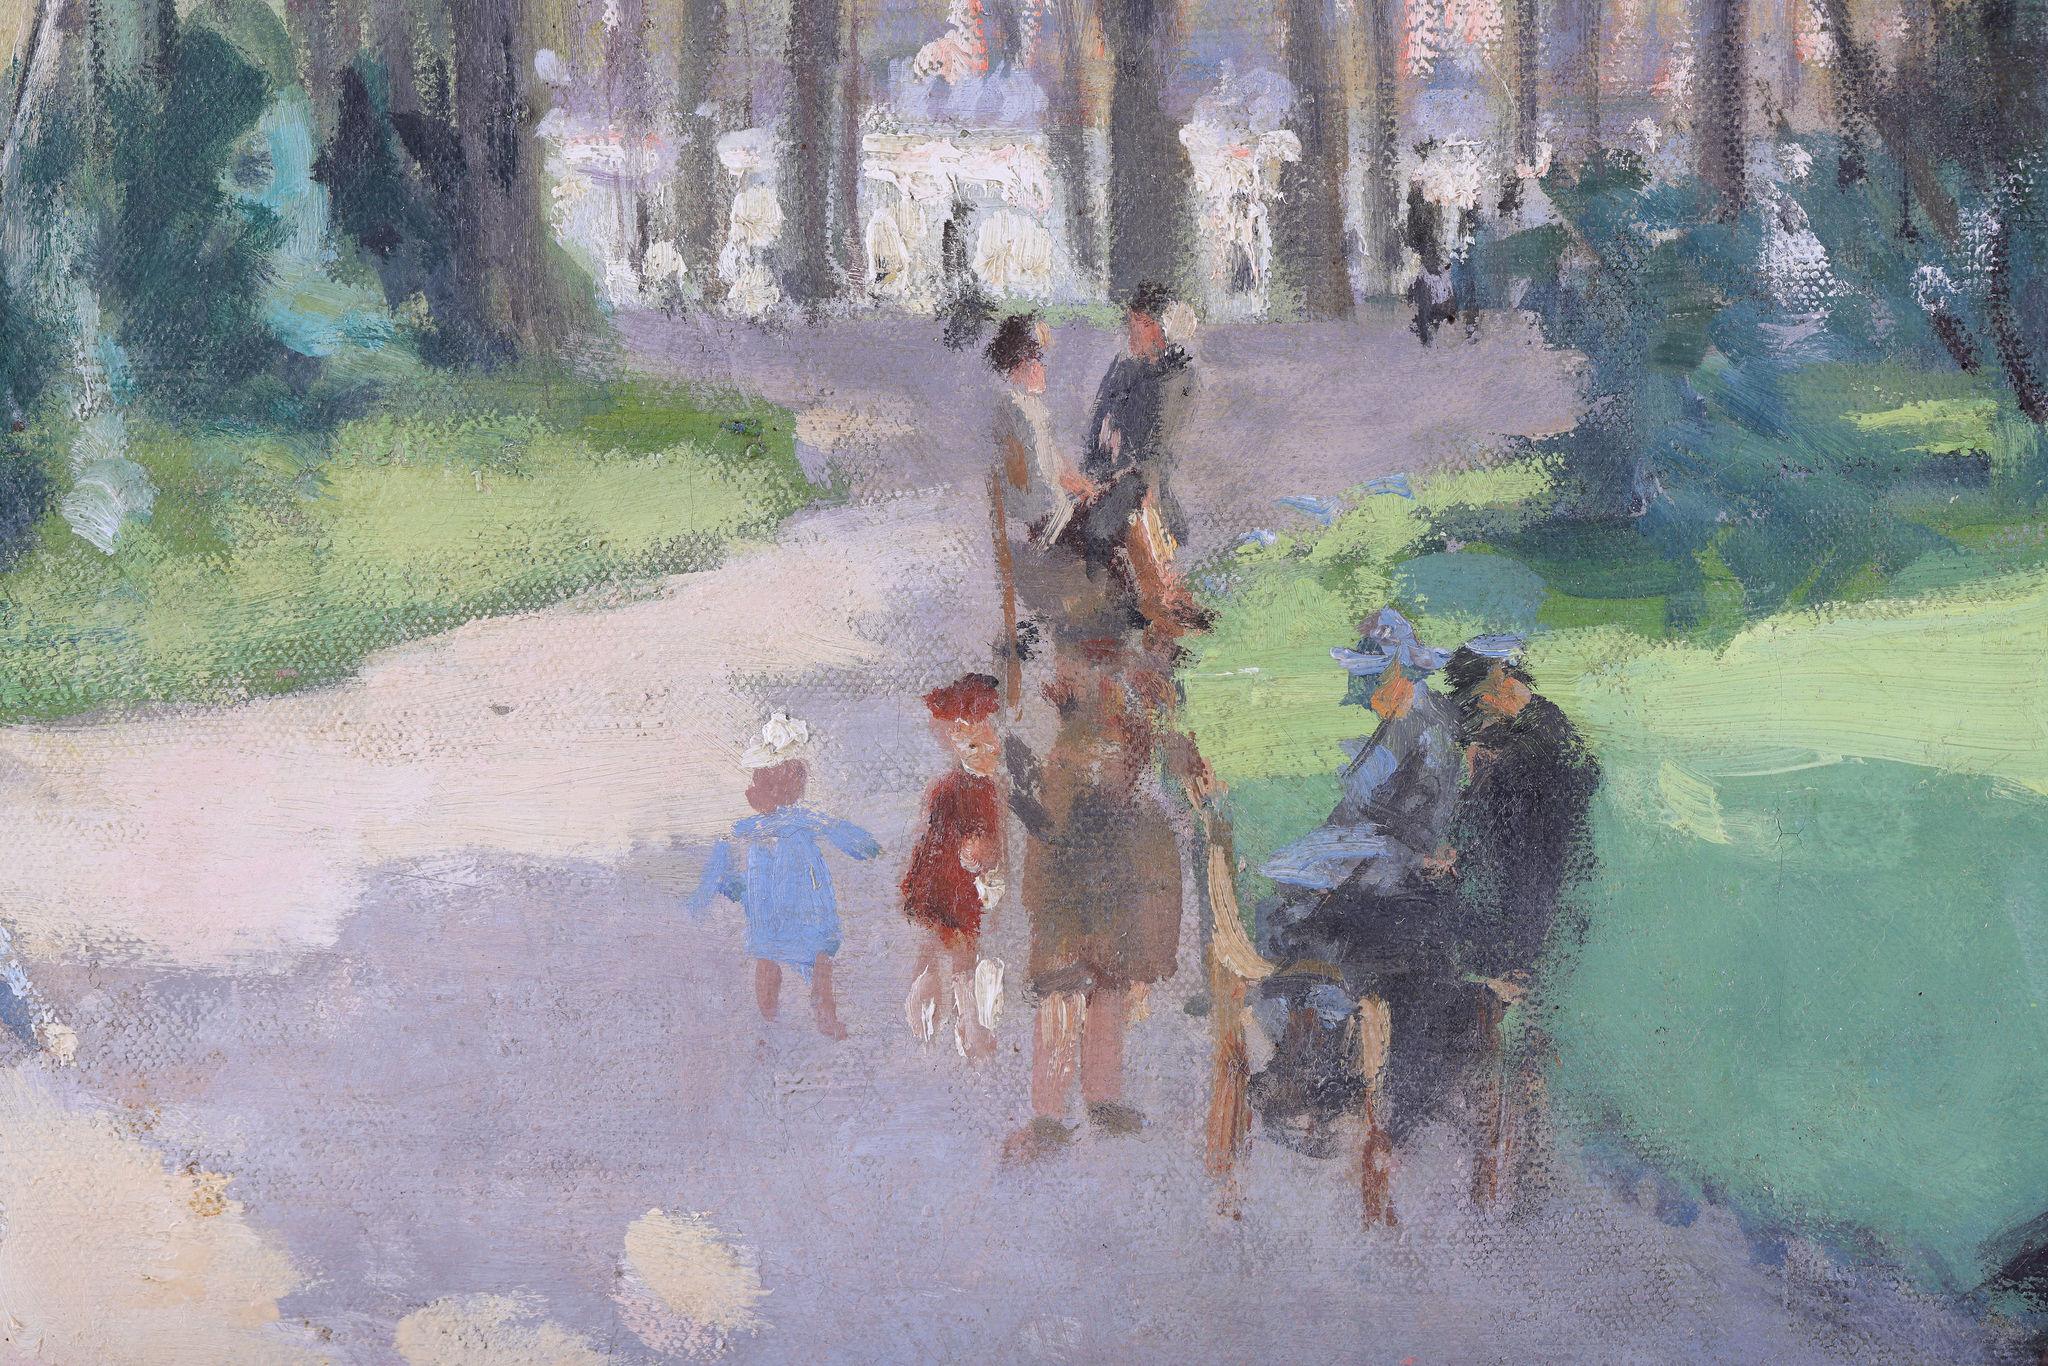 Lucienne Bisson
A beautiful painting in a handmade frame finished in gold leaf. It is in excellent condition and provides a glimpse into the parks in Paris on a beautiful French summers day.

Canvas Size: 20 x 24